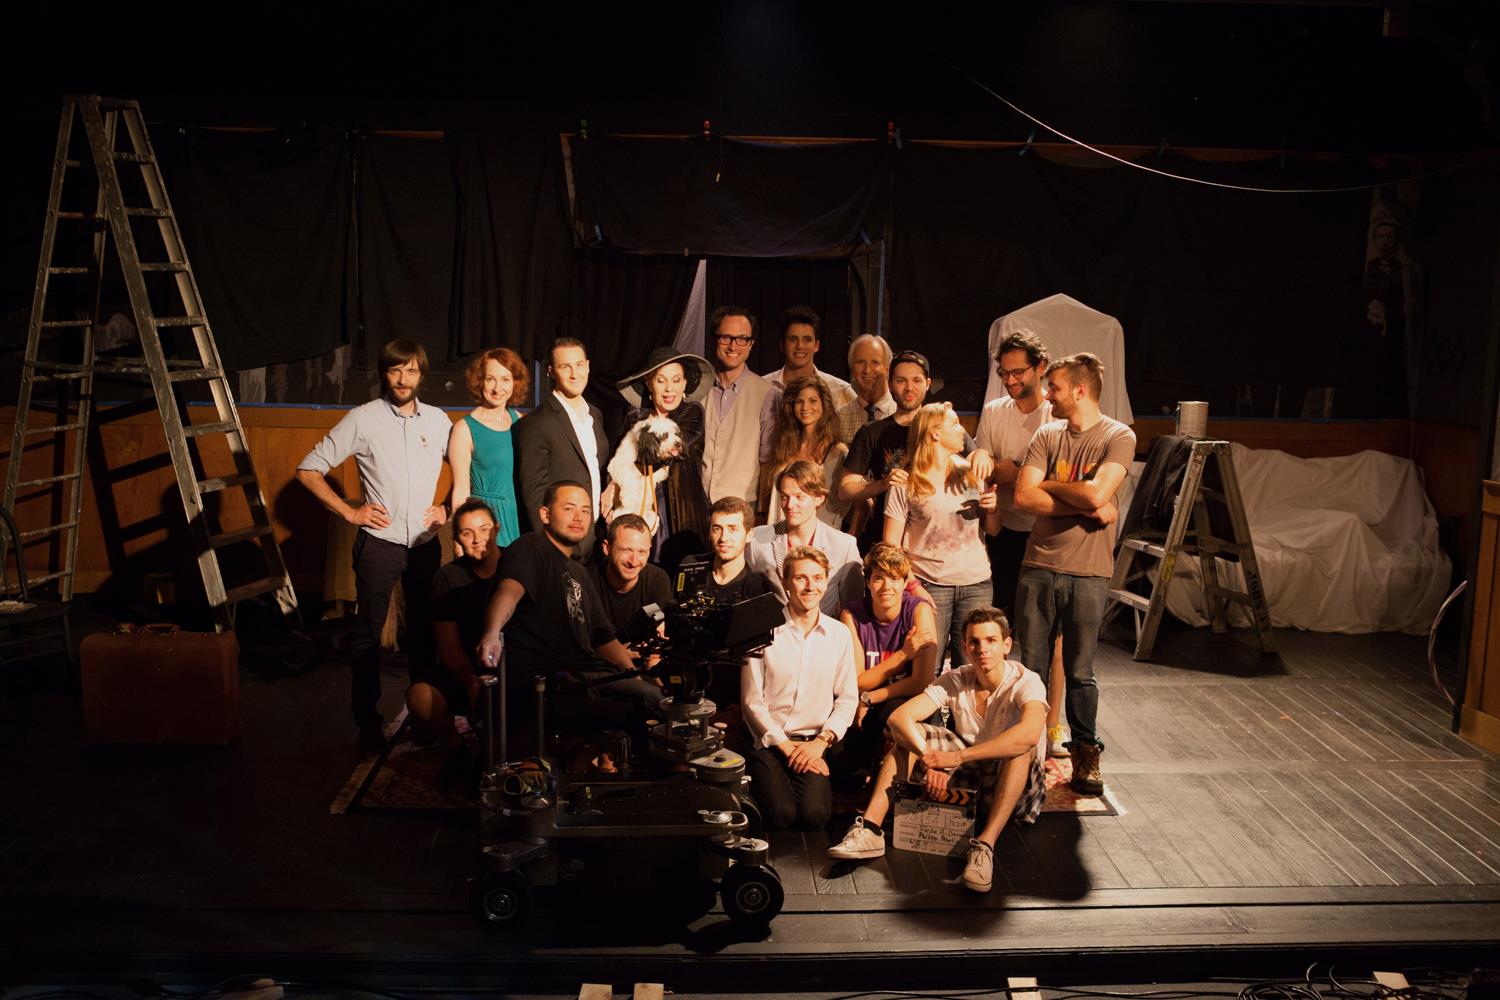 Cast & Crew from KIM 2014 at NYC